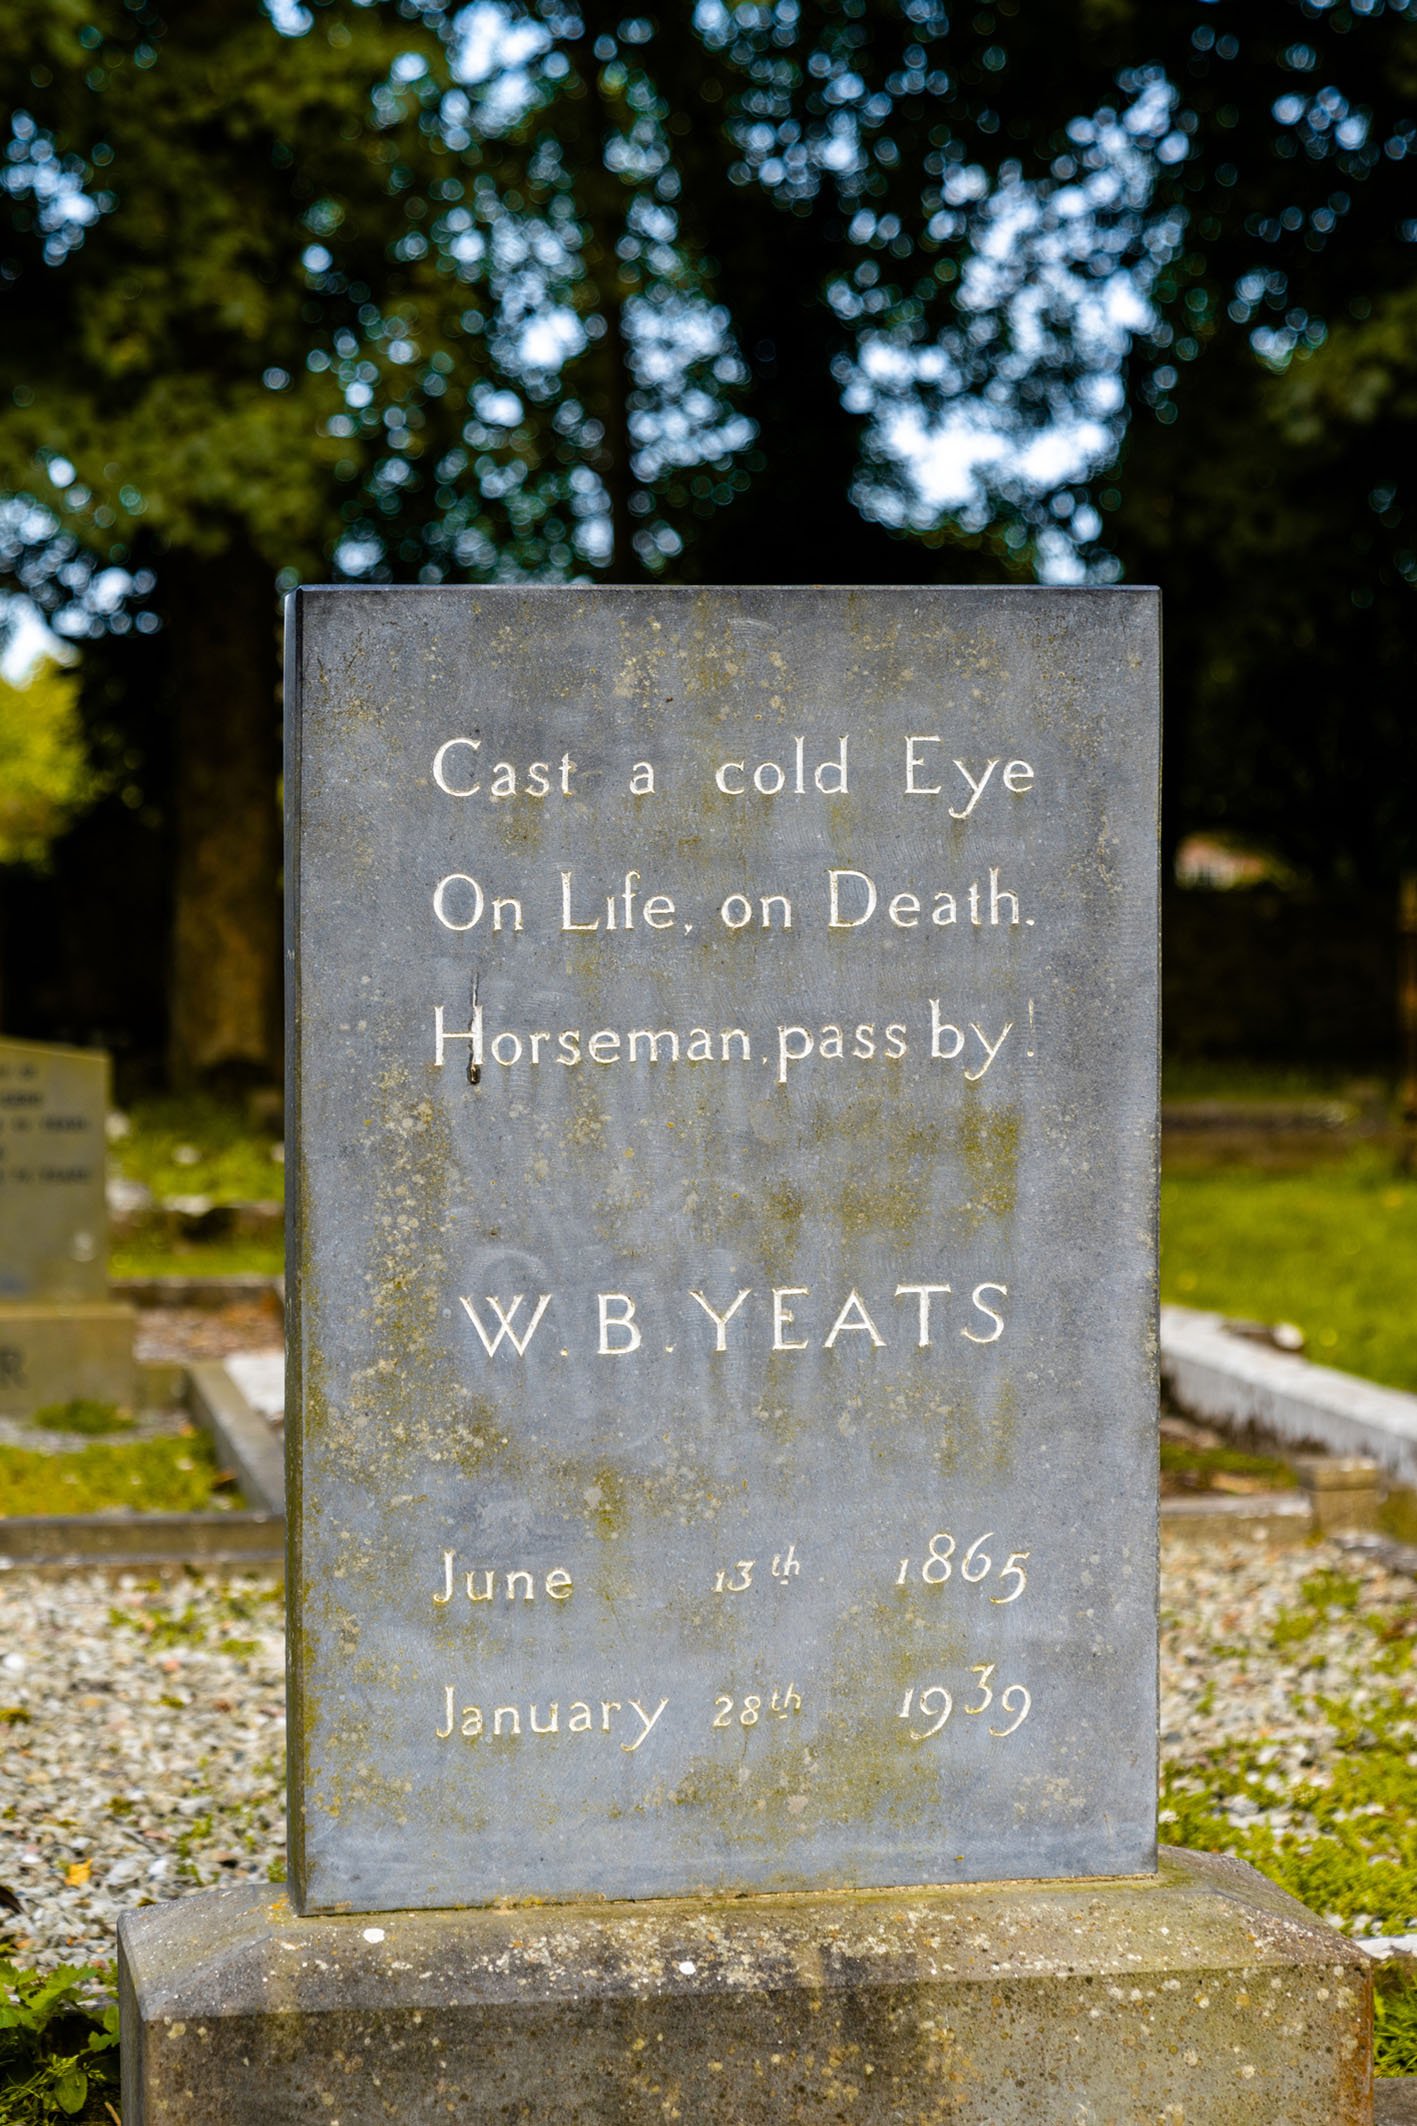 Drumcliffe, Ireland - 17 June, 2022: close-up view of the headstone and grave of william Butler Yeats imn the Drumcliffe Parish Church Cemettery